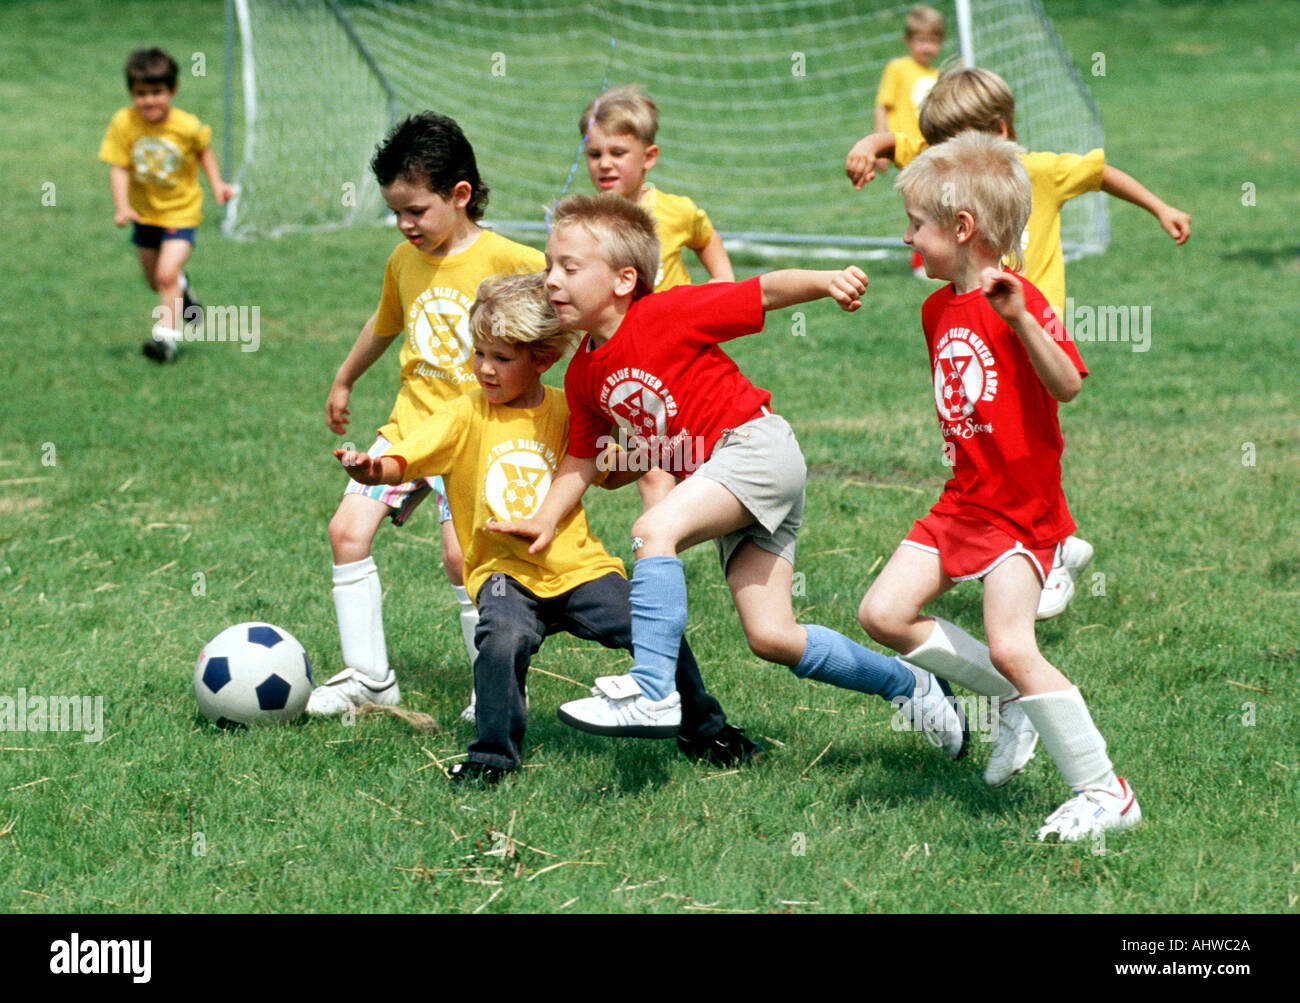 Soccer action with 5 7 year old boys Stock Photo